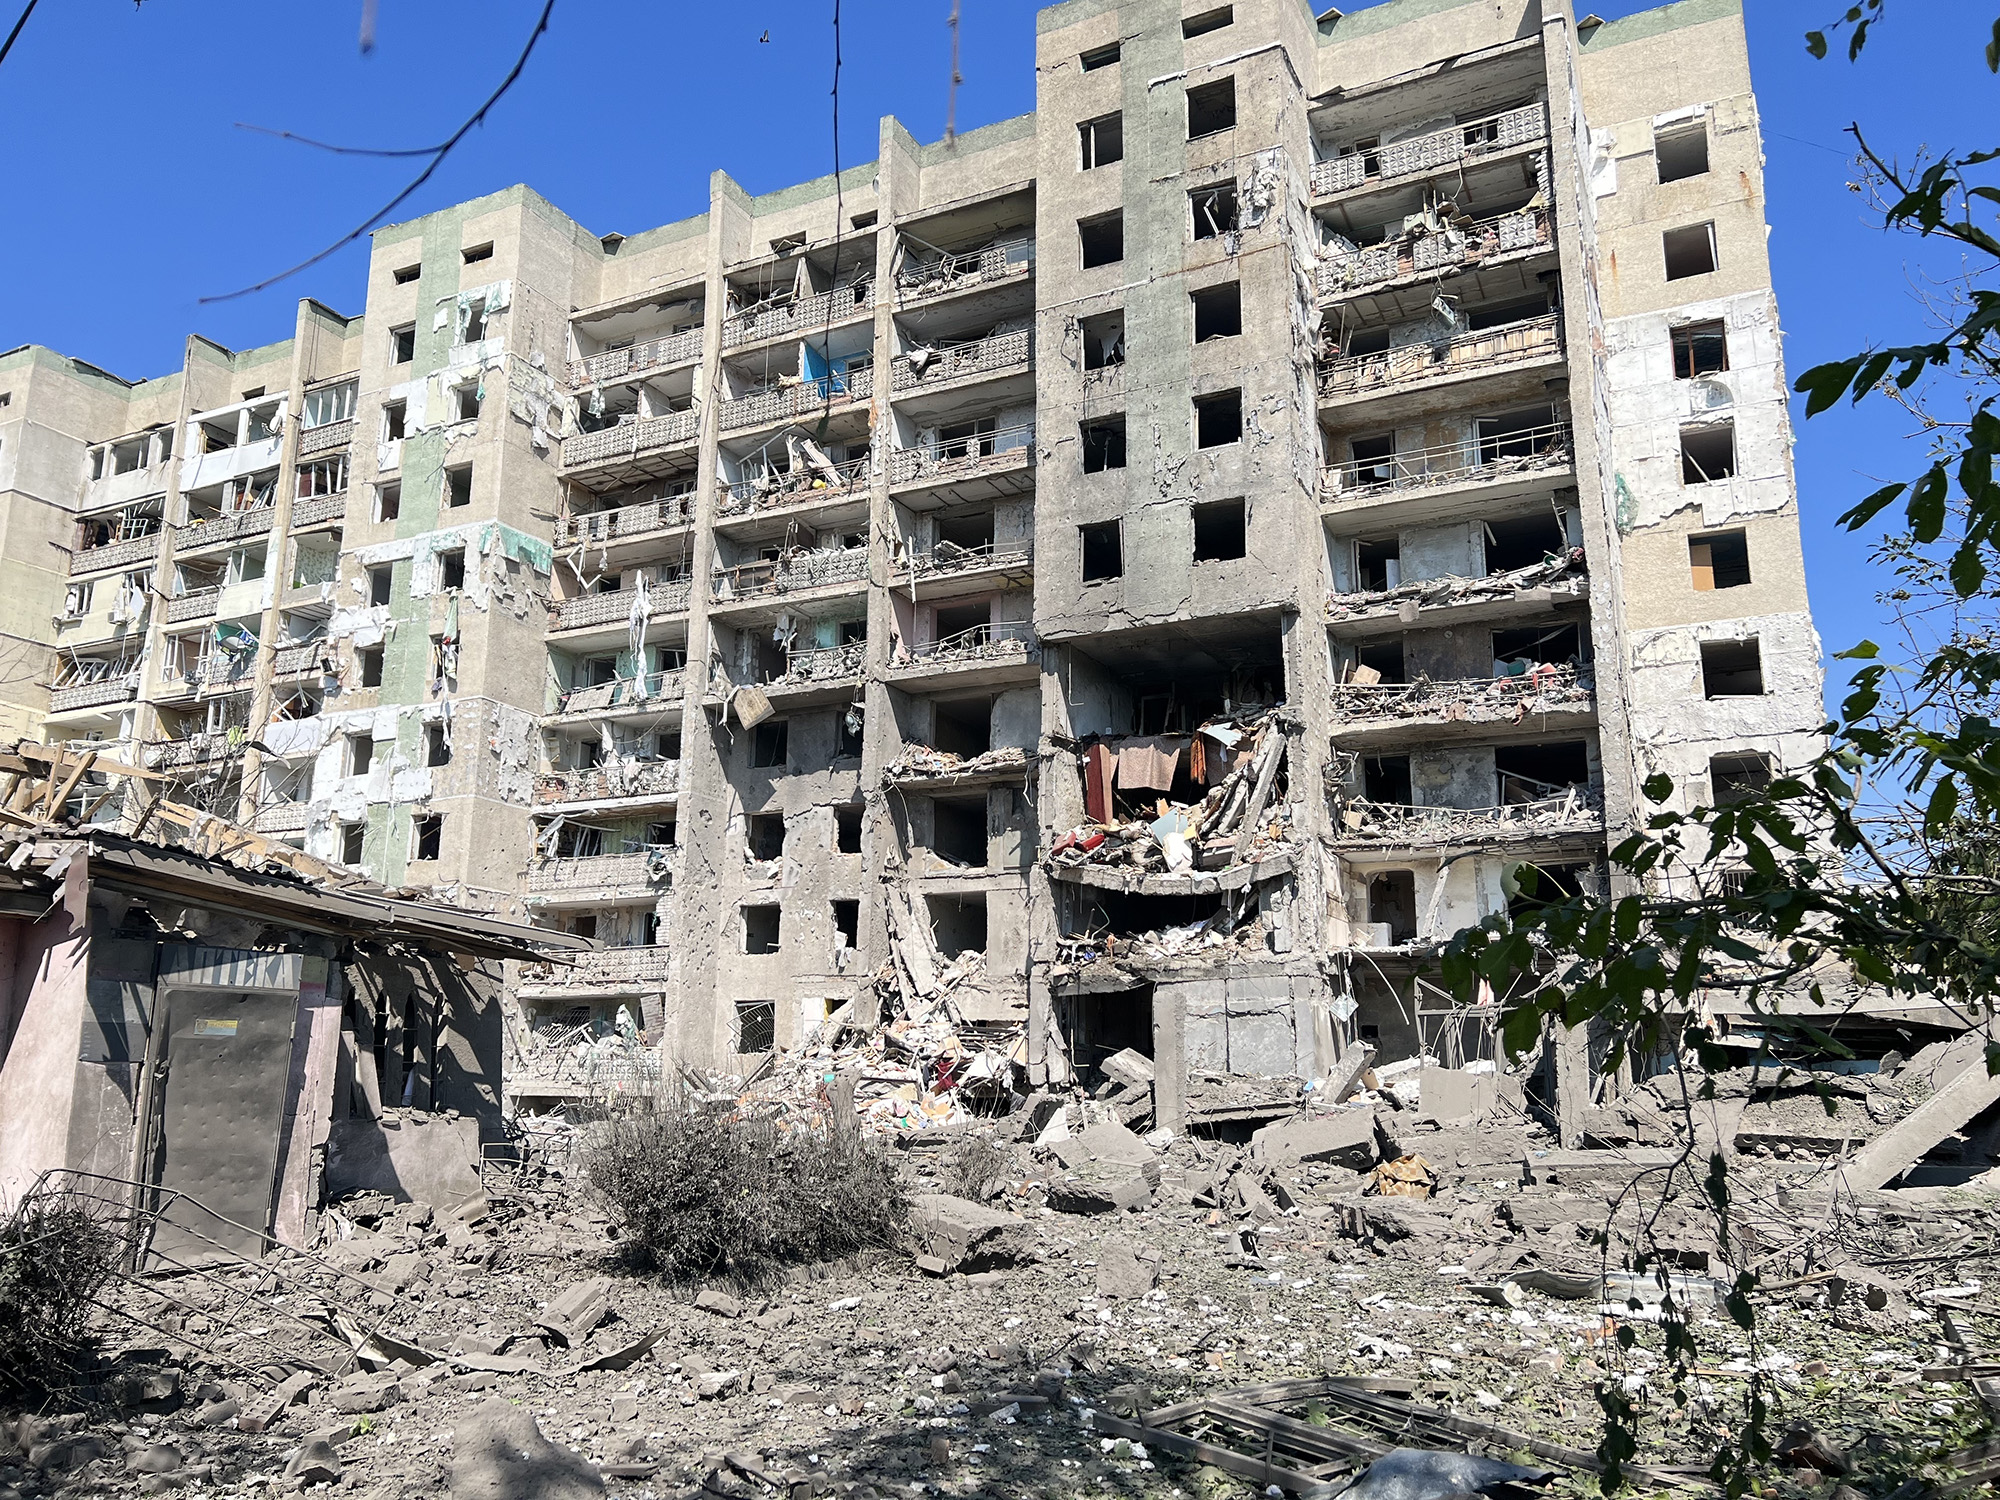 ODESSA, UKRAINE - JULY 01: A destroyed building is seen after the Russian missile attack where 17 p...